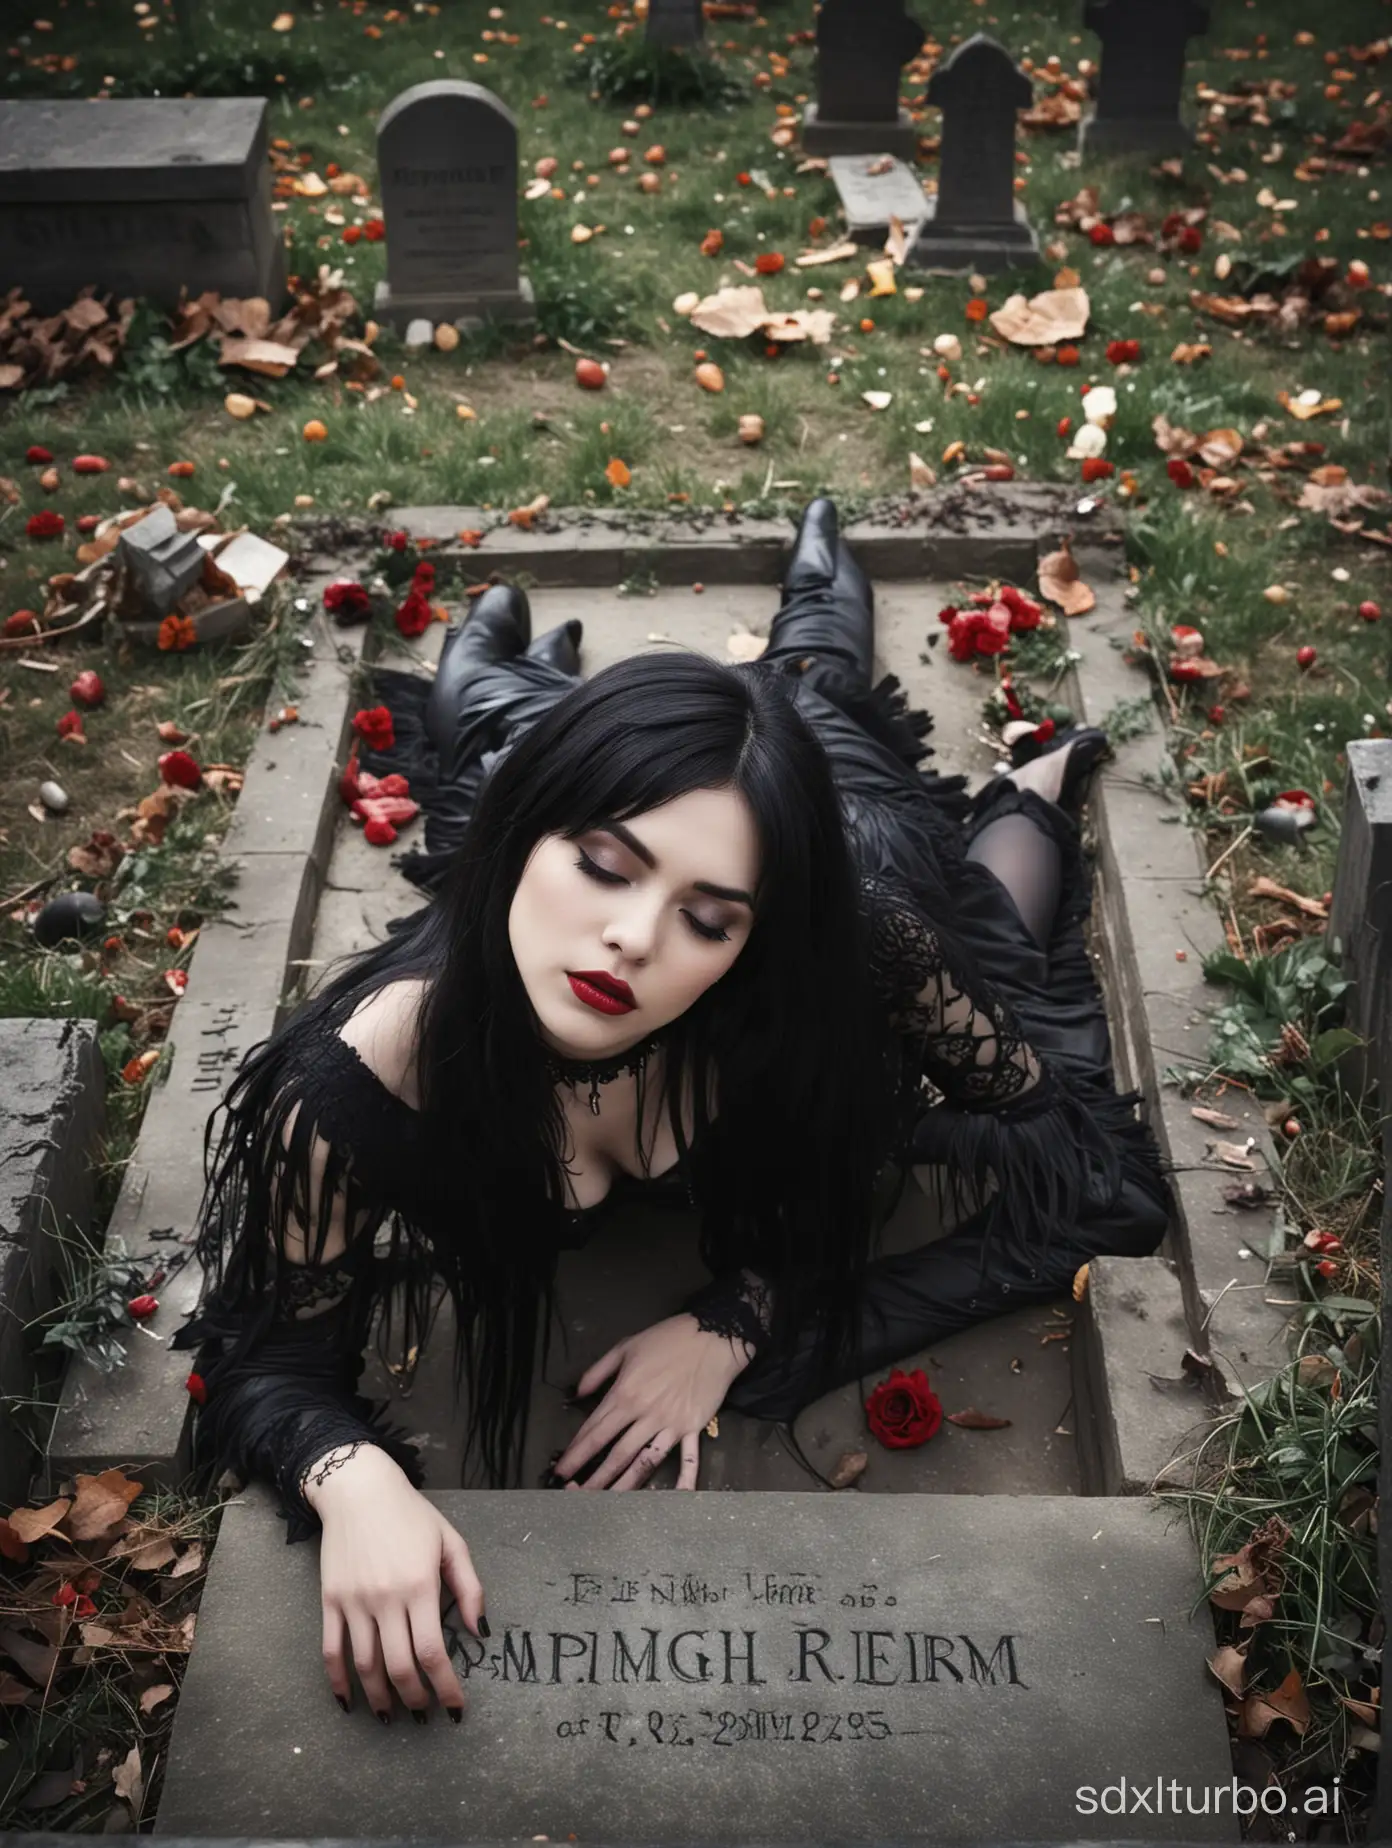 Format photo 5:4
Camera lens 120 mm
prospect framing
Girl, gothic style, 30 years old, long black hair, fringe, eyes closed, very clear skin, heavy make up, dark make up, gothic make up, red lips, full body photo, dead, lying horizontal on a tomb, in a graveyard